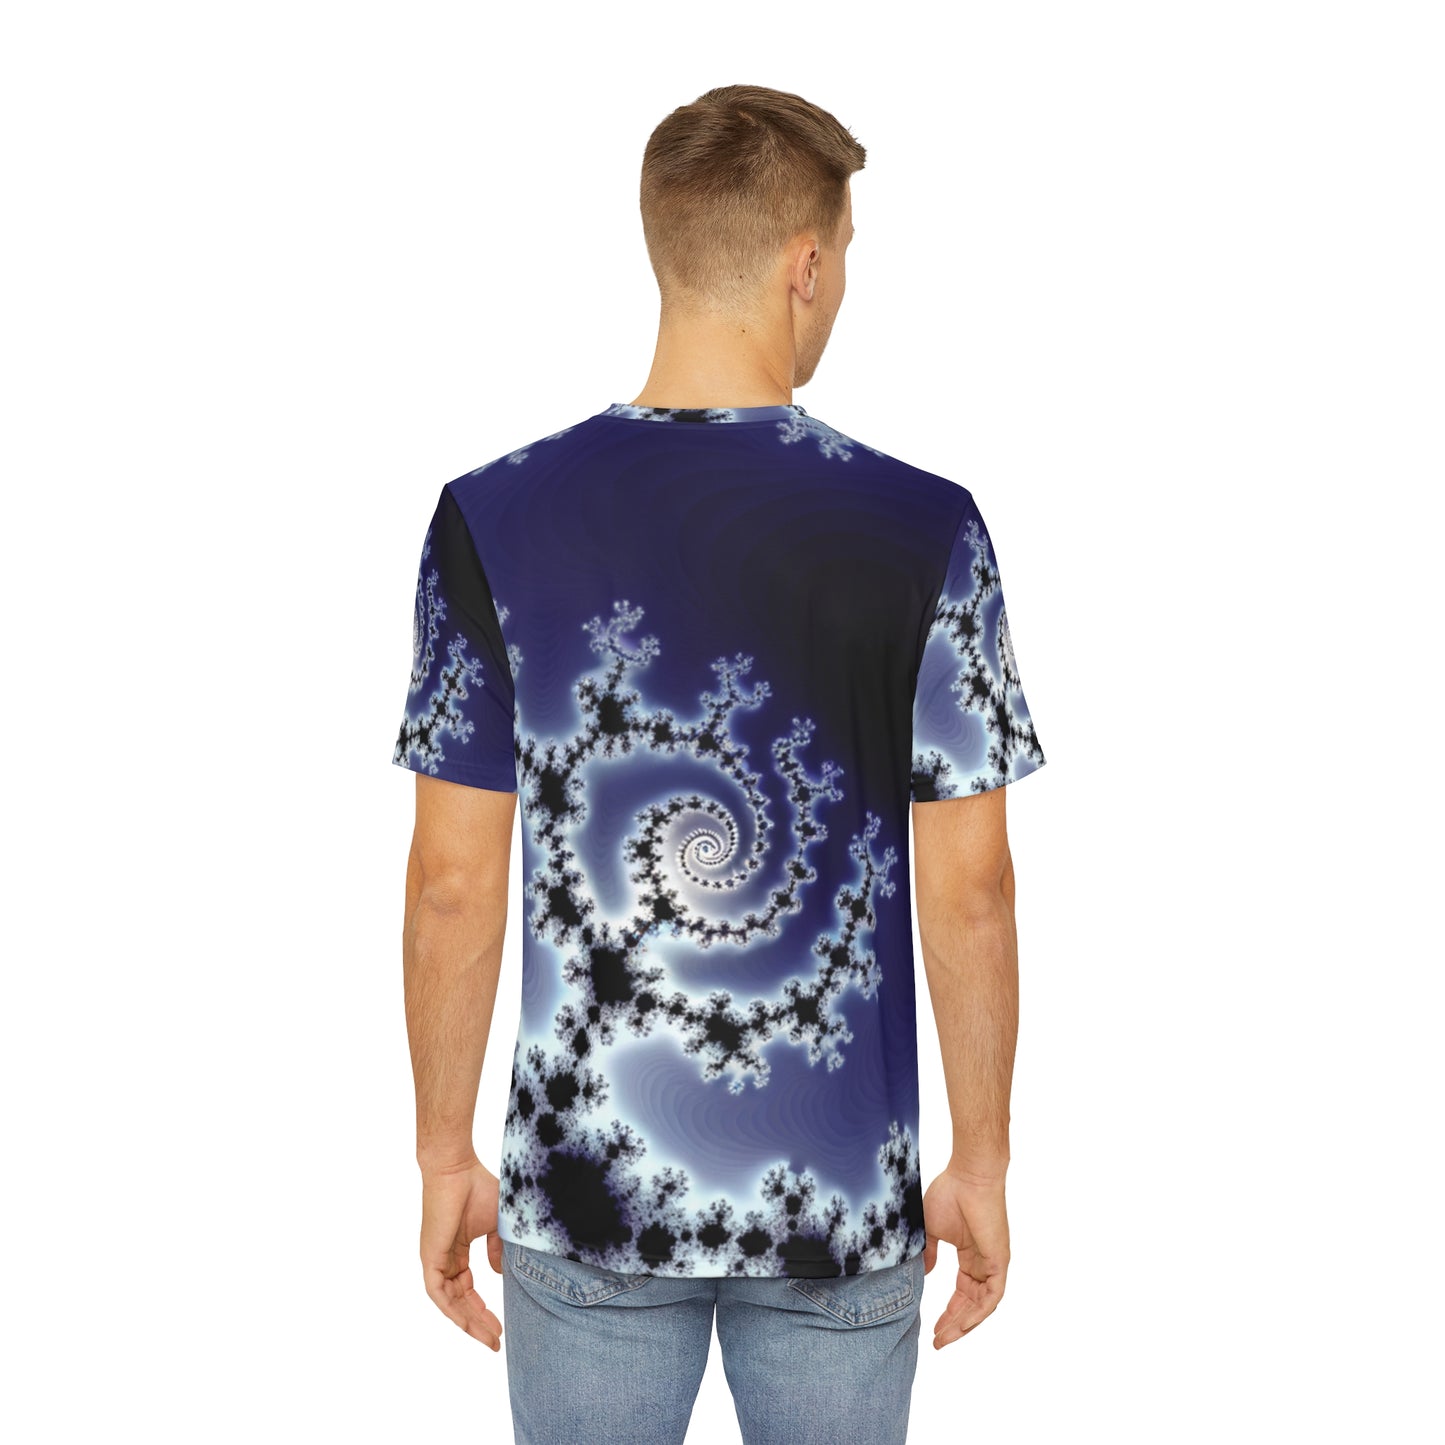 Back view of the Celestial Fractal Elegance Crewneck Pullover All-Over Print Short-Sleeved Shirt purple black white fractal pattern paired with casual denim pants worn by a white man